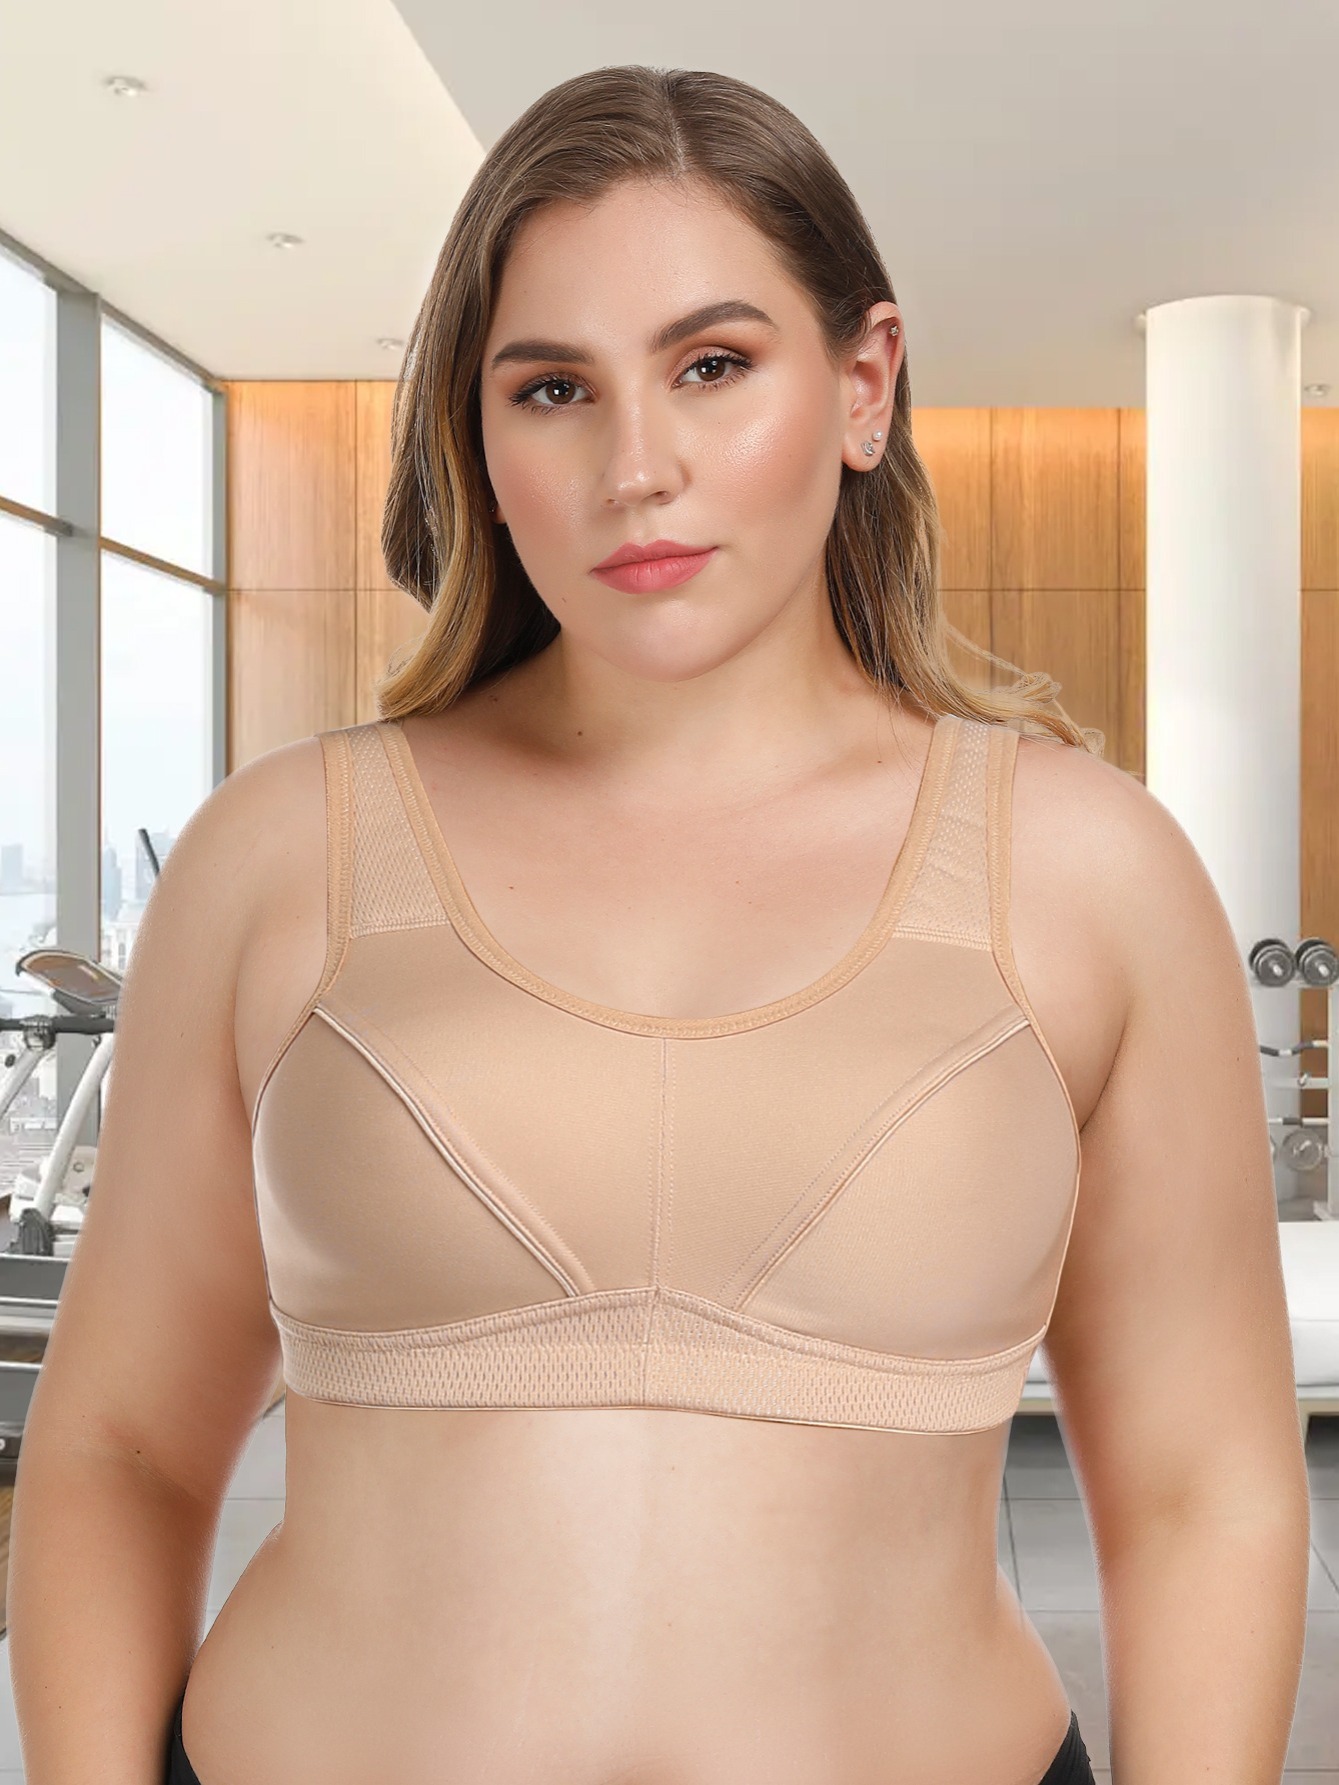 Review: The Plus Size Sports Bra That is Changing The Game! - The